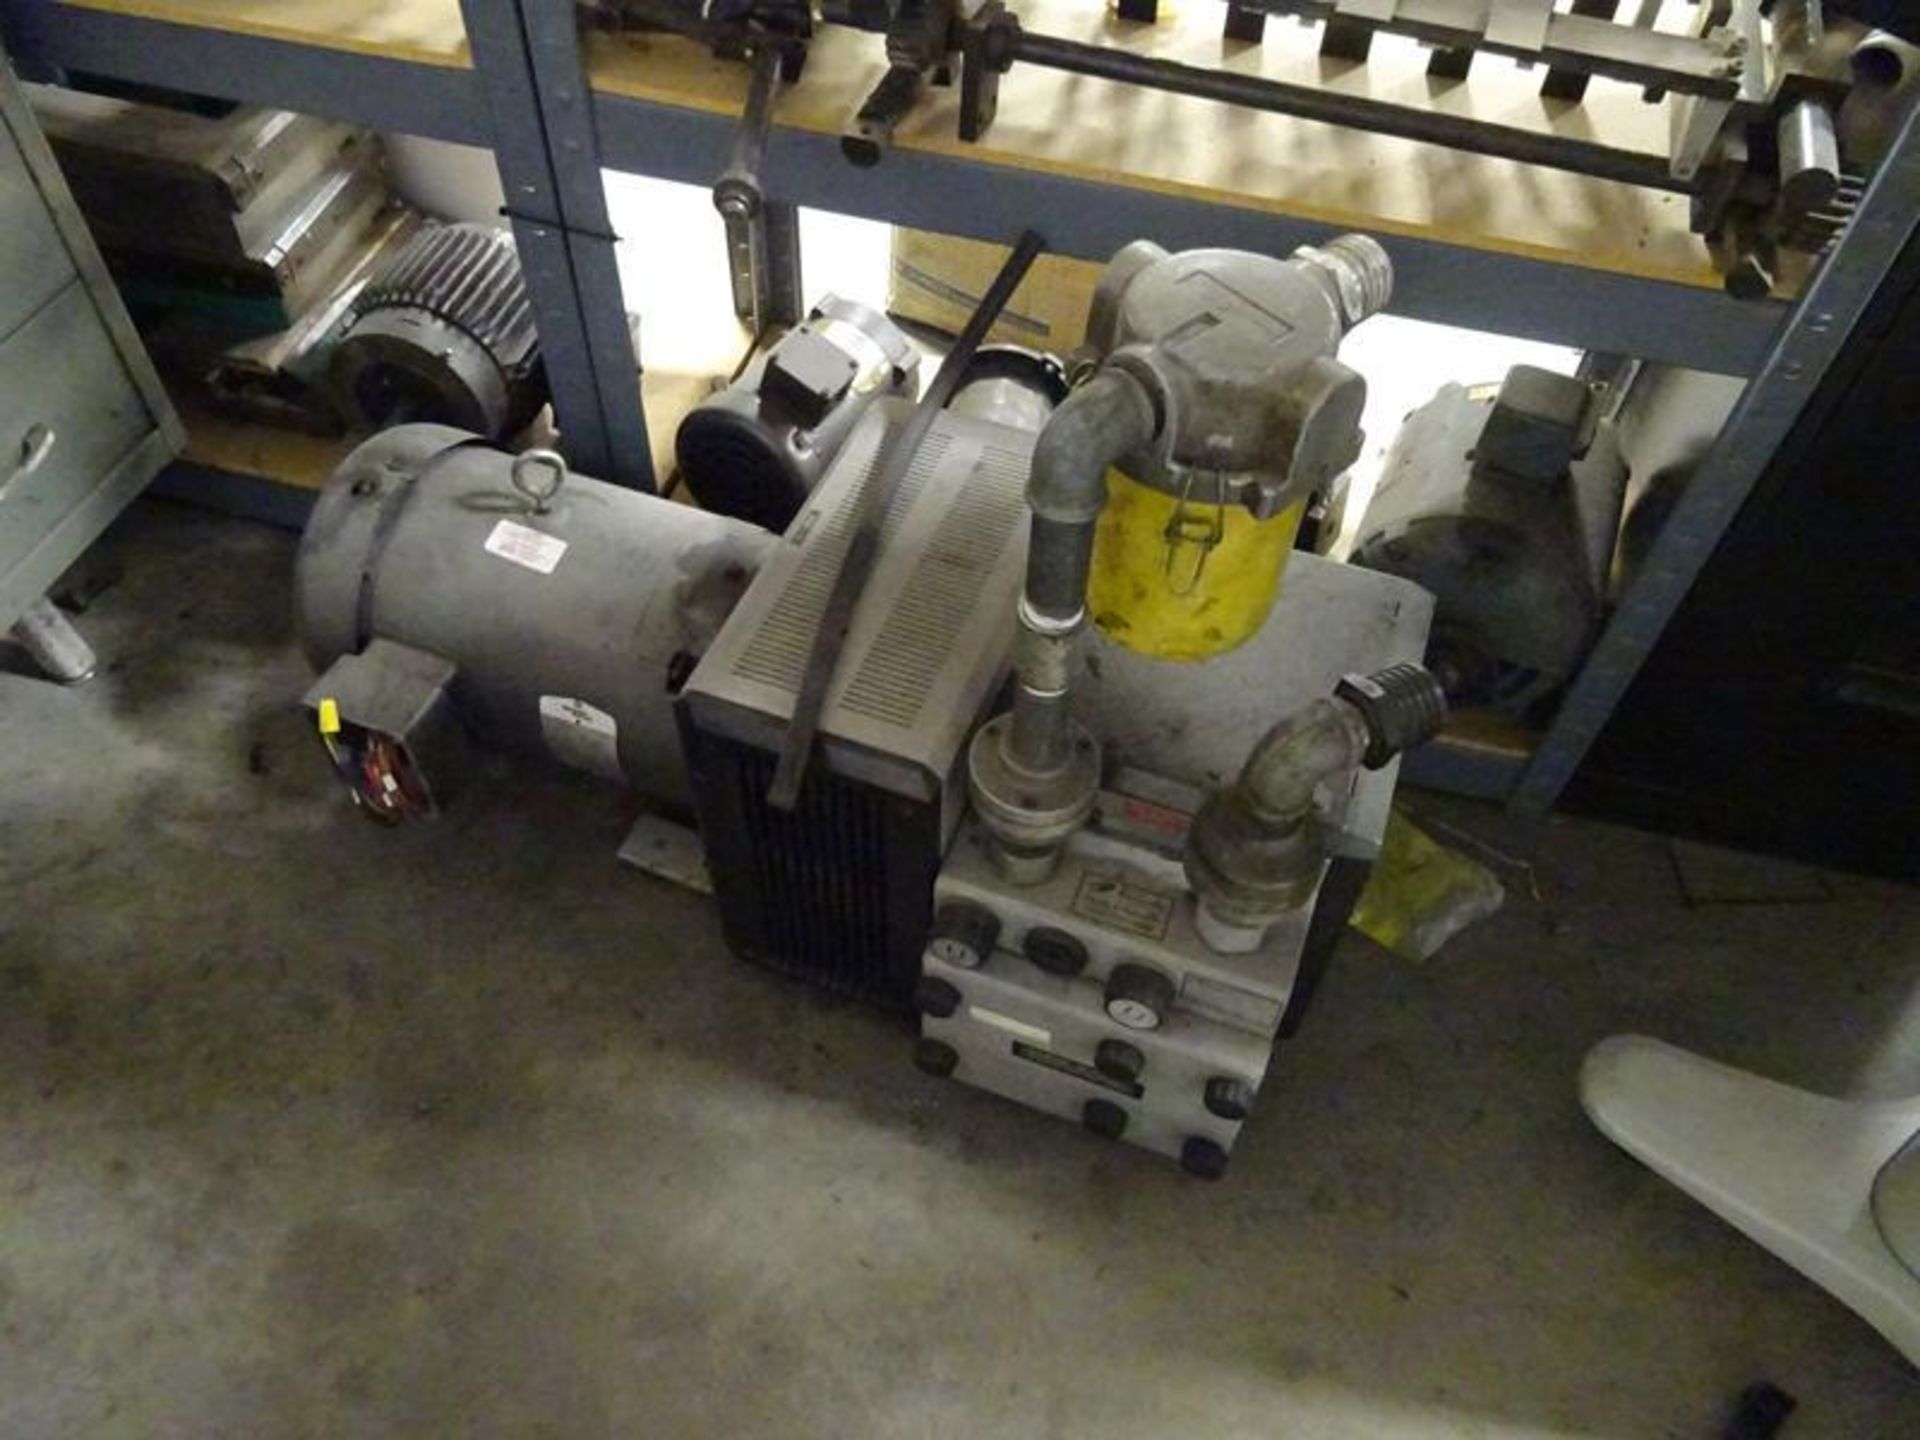 Contents Of Maintenance Area: Muller Parts, Rietschle KTA80 Pump, Hardware, Etc. (Manual Not Include - Image 2 of 6